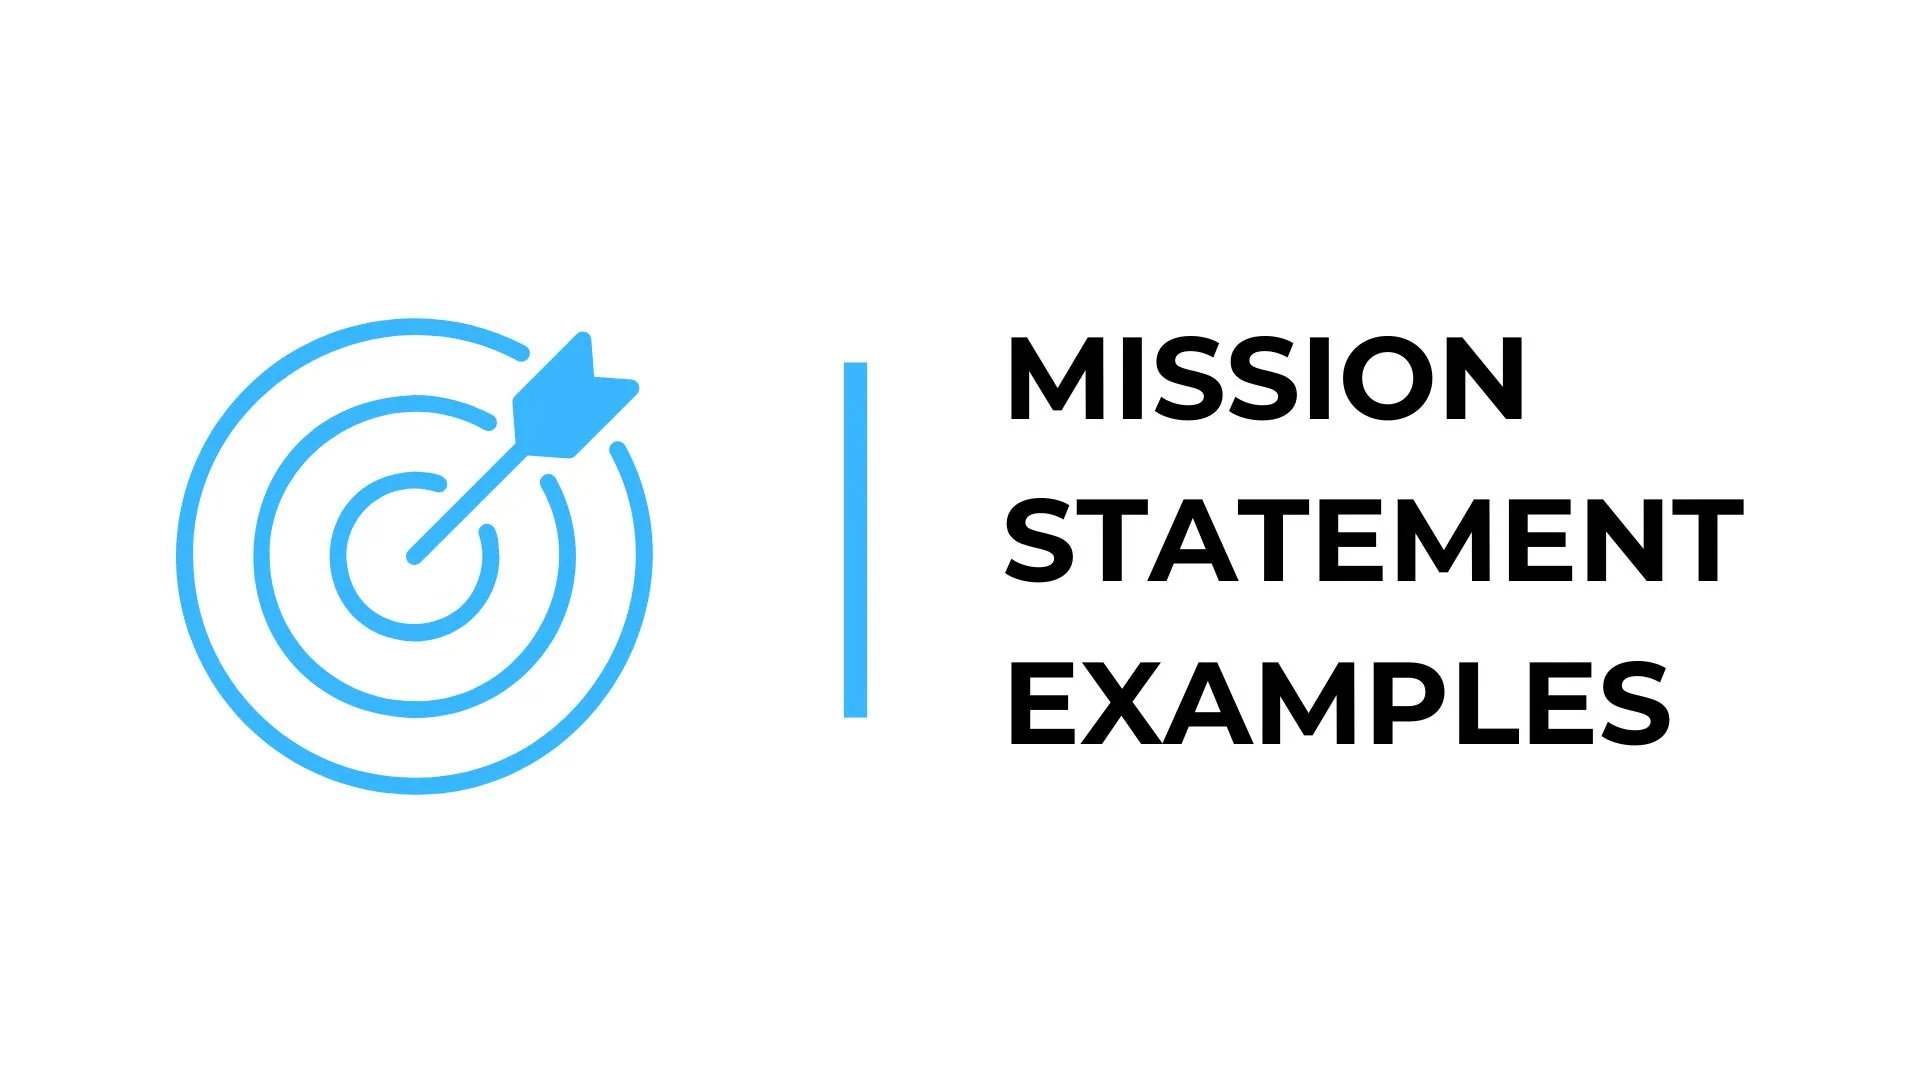 Mission Statement Examples